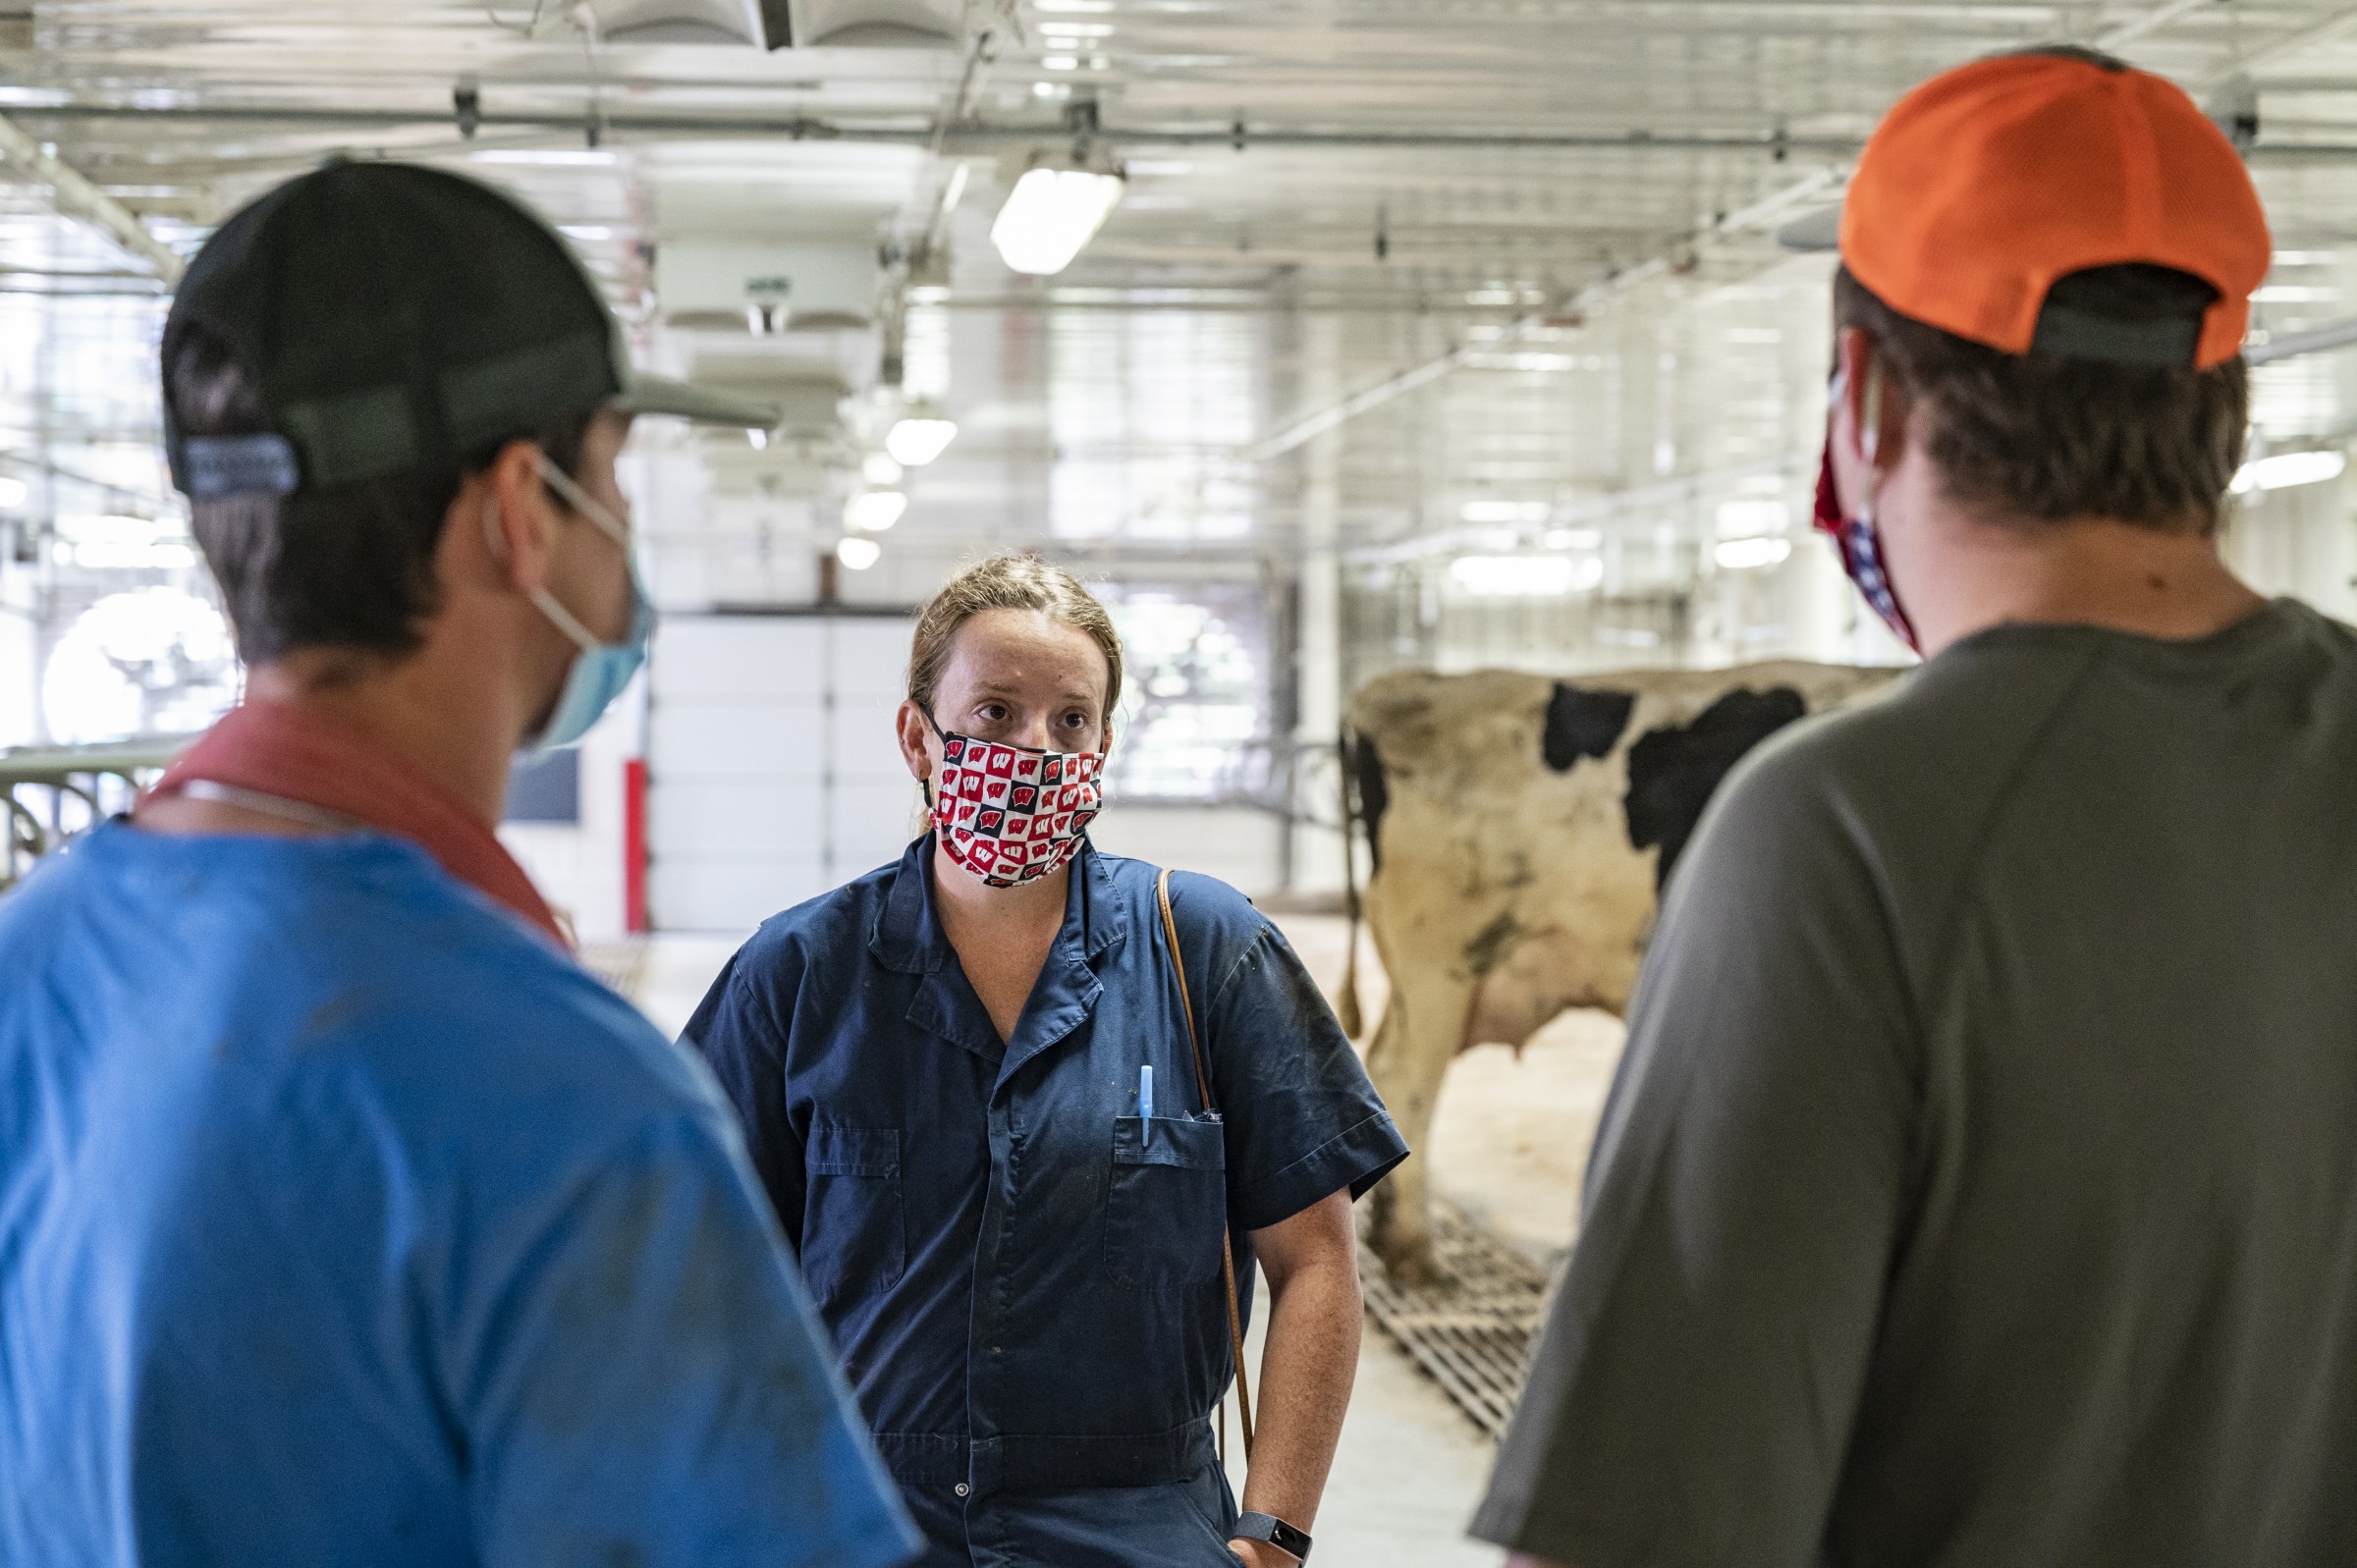 Two men talking with a woman in a dairy barn. All three people are wearing masks covering their mouths.